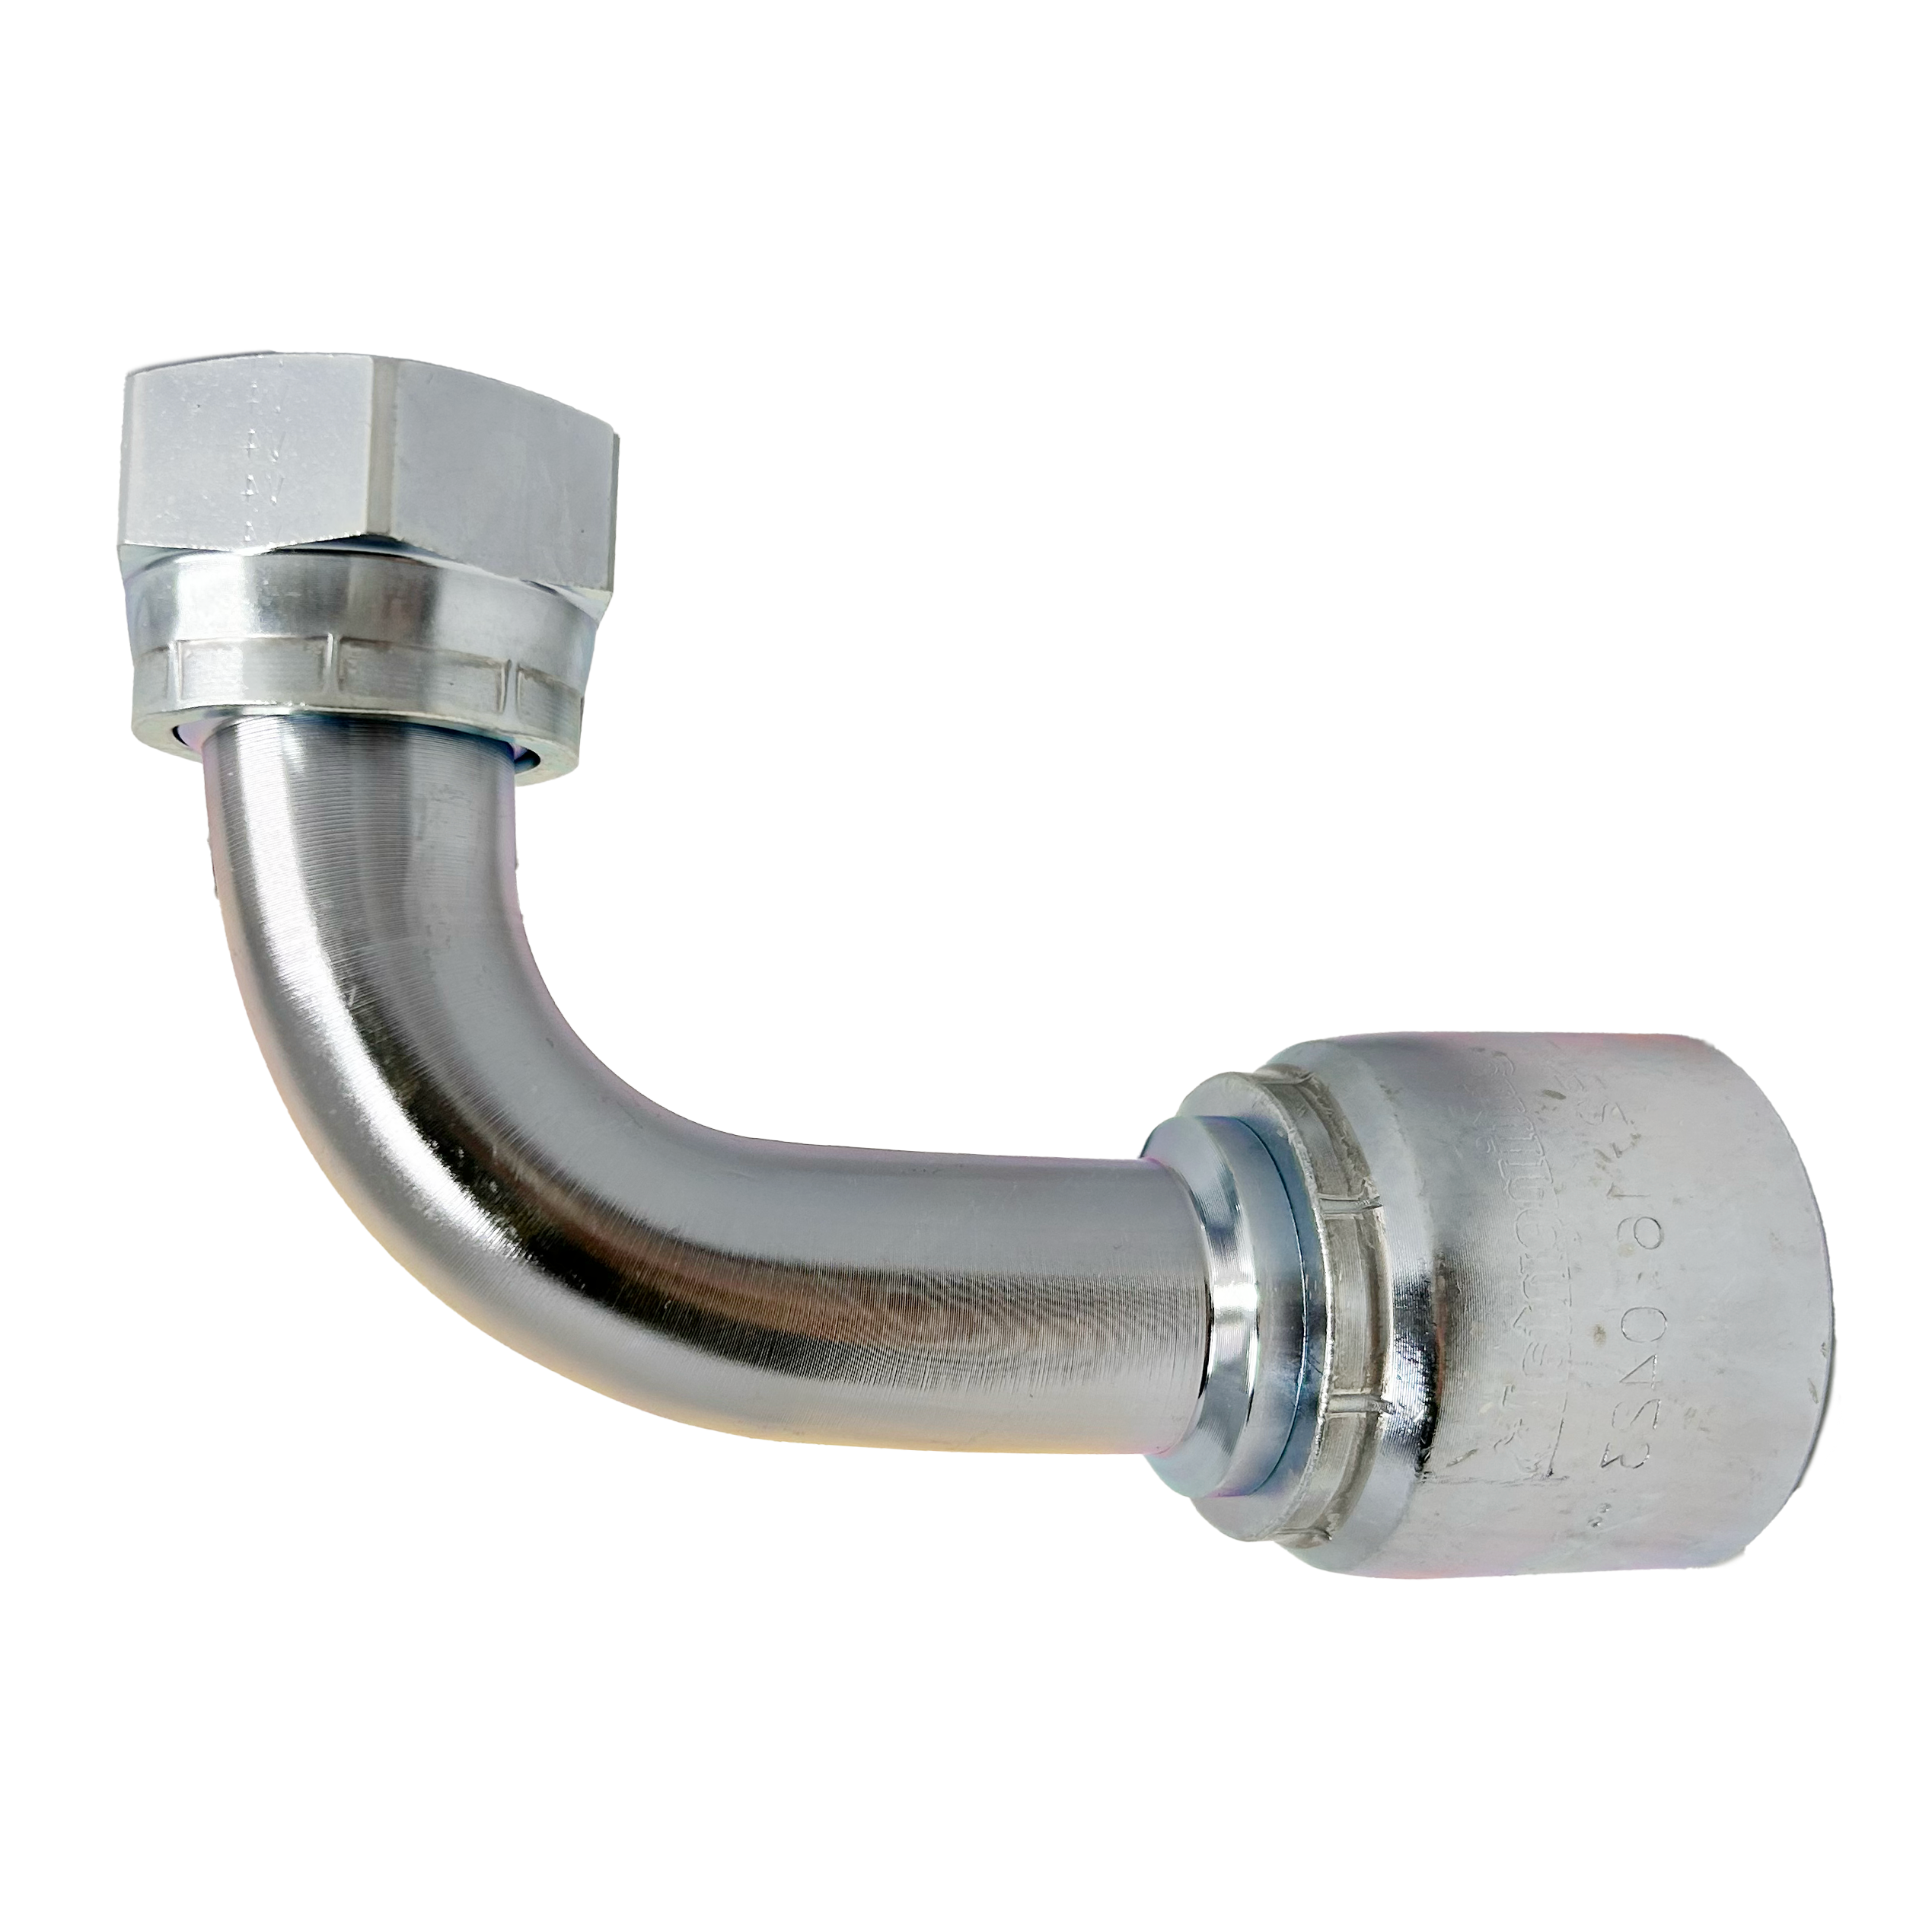 B2-OFFX90-1620: Continental Hose Fitting, 1" Hose ID x 1-11/16-12 Female ORFS, 90-Degree Swivel Connection